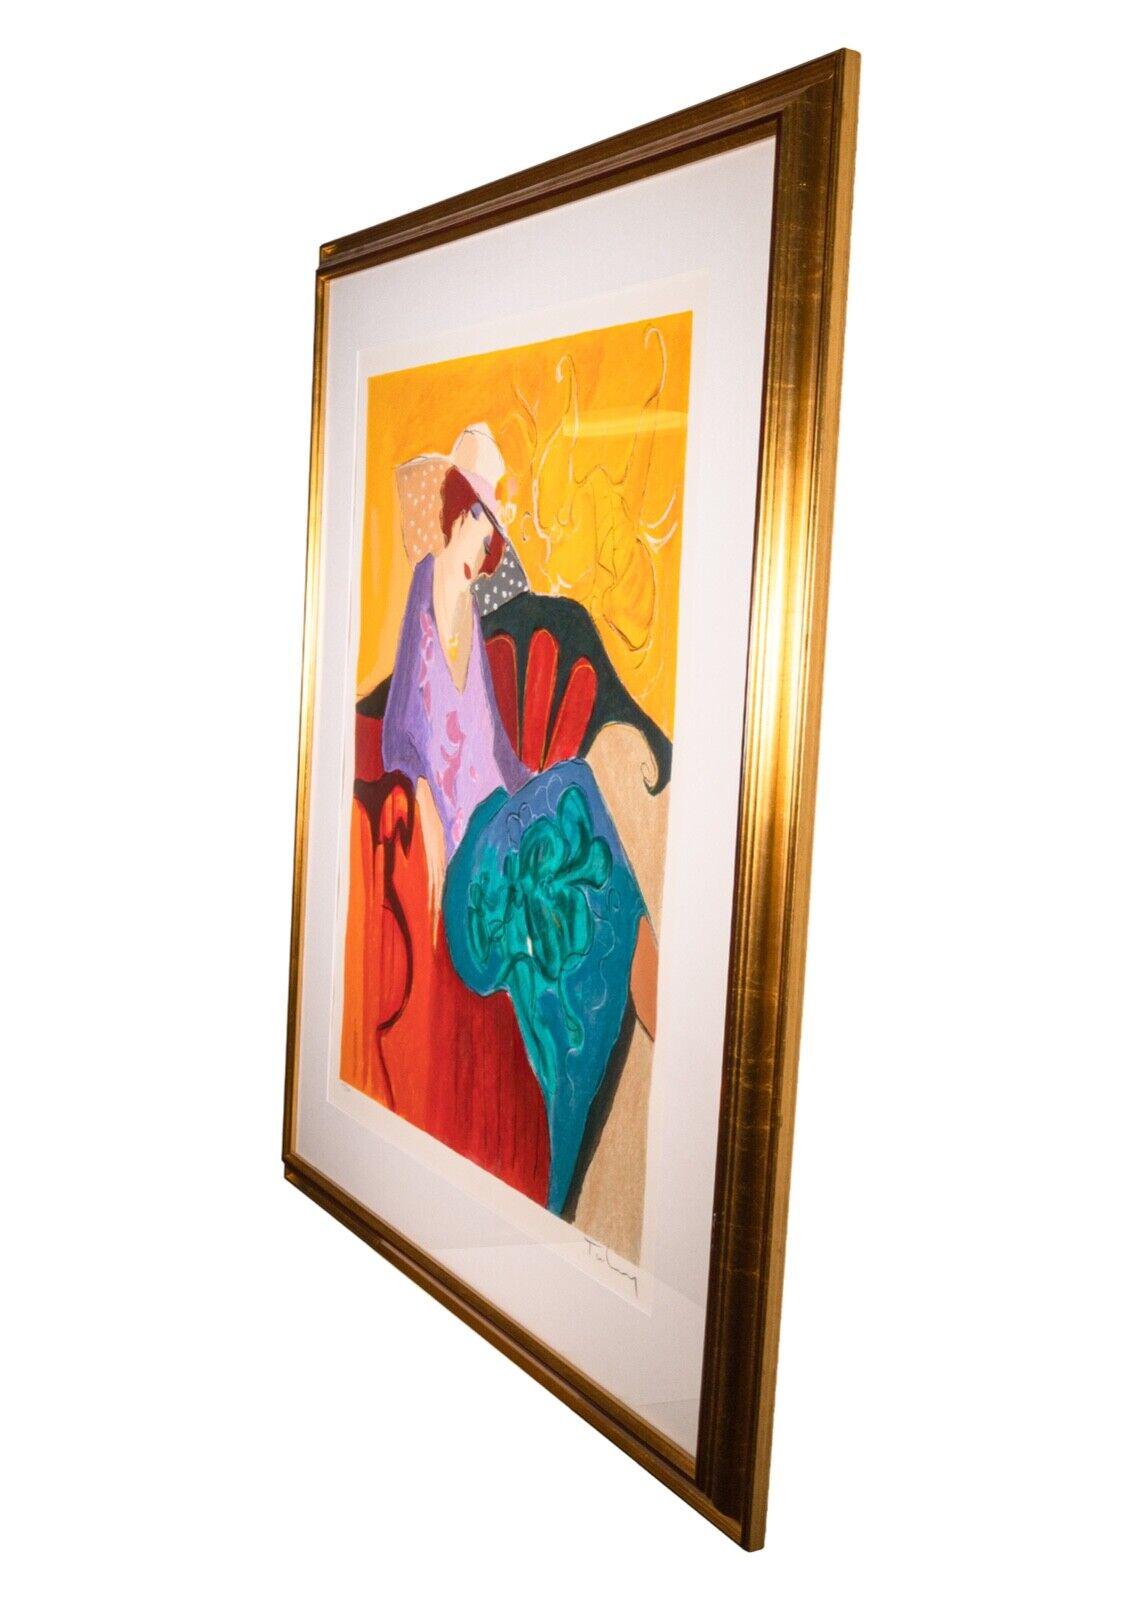 Itzchak Tarkay Seated Lady in Purple Signed Contemporary Serigraph 296/350 F In Good Condition For Sale In Keego Harbor, MI